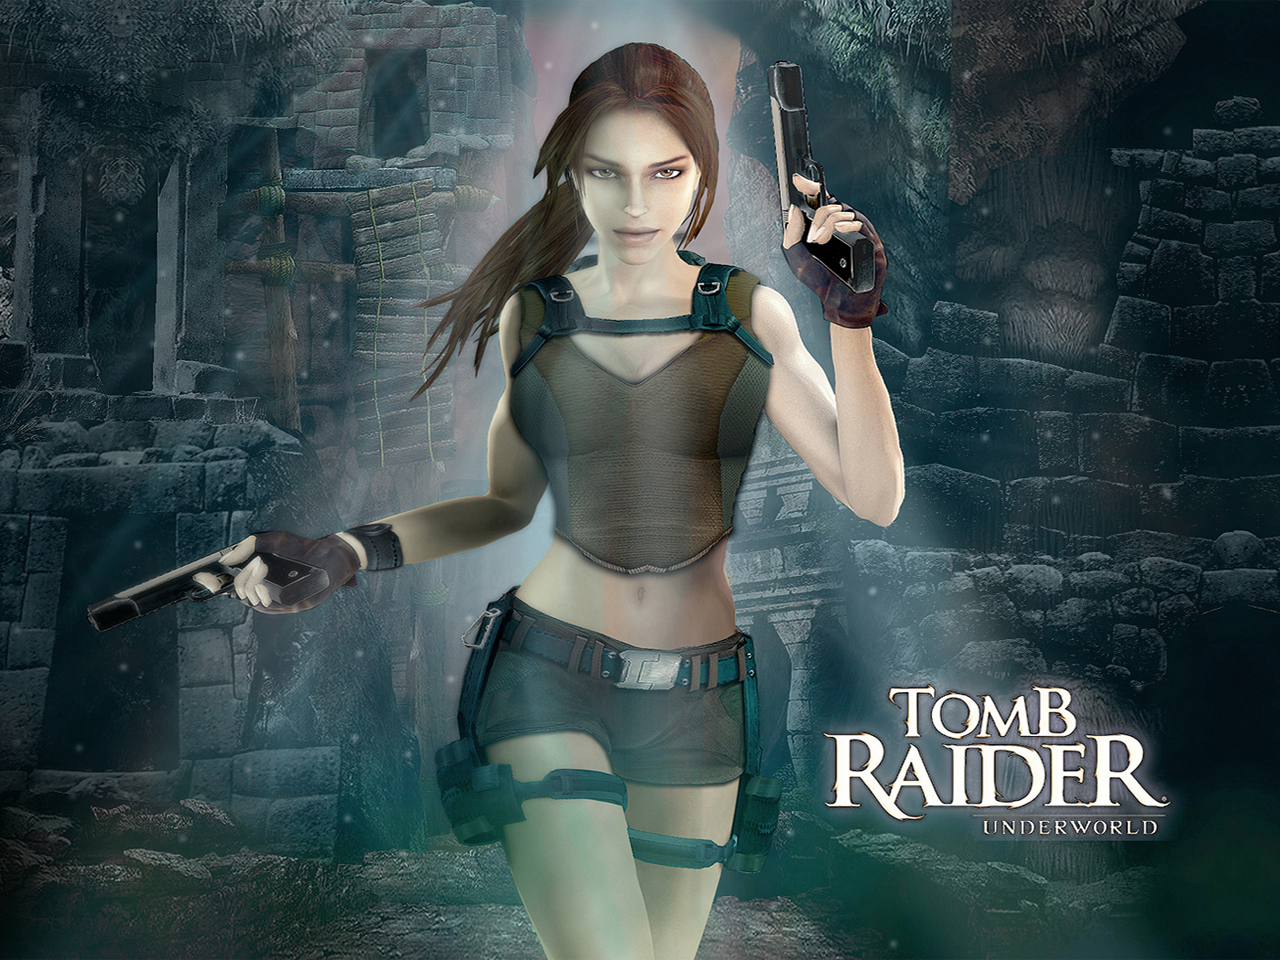 Tomb Raider HD Trilogy Revealed For Ps3 Features